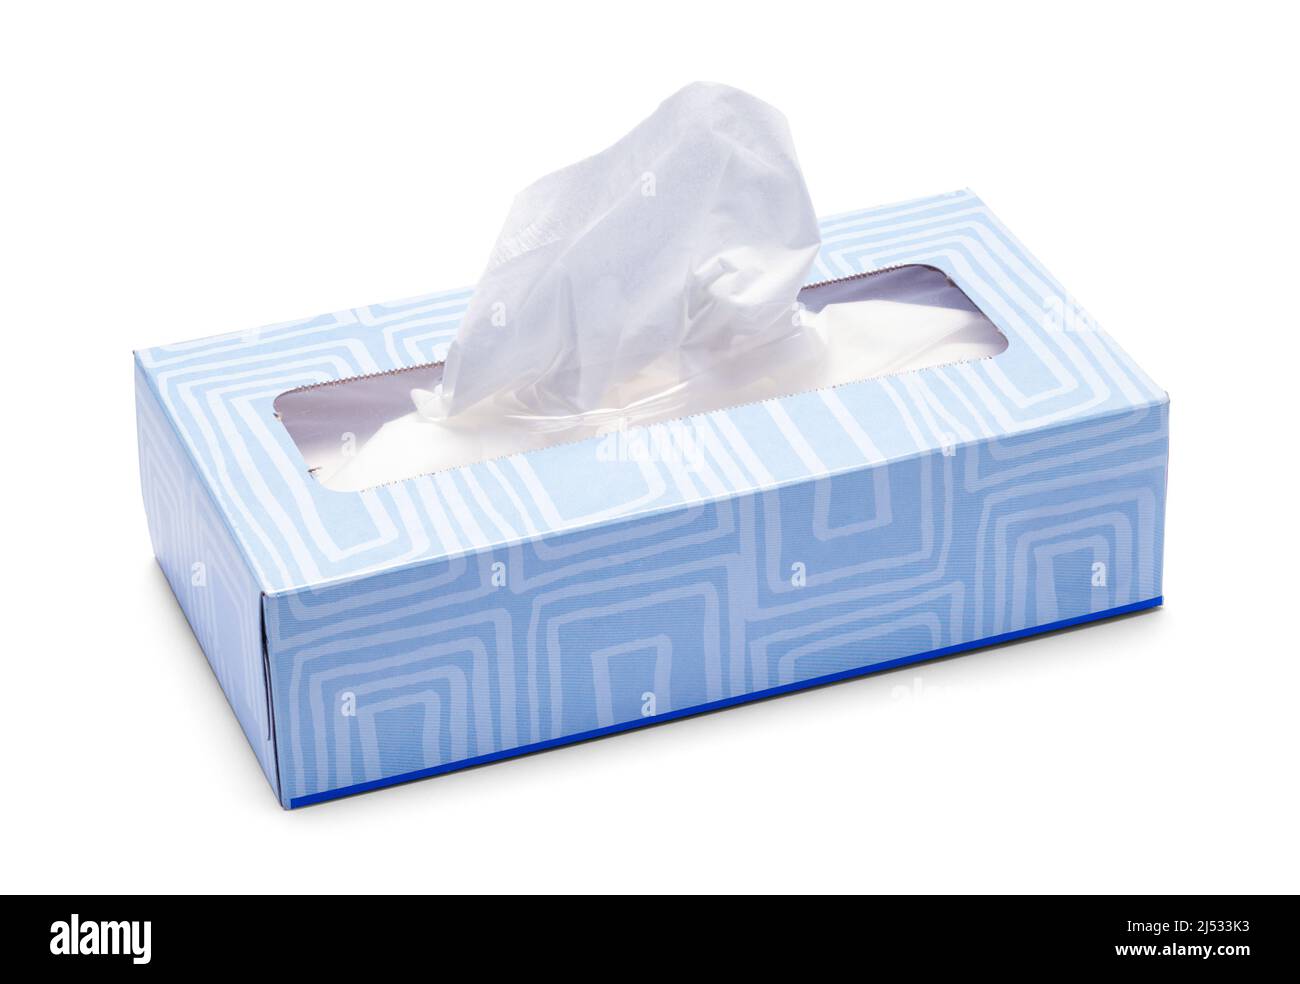 Facial Tissue Box Cut Out on White. Stock Photo